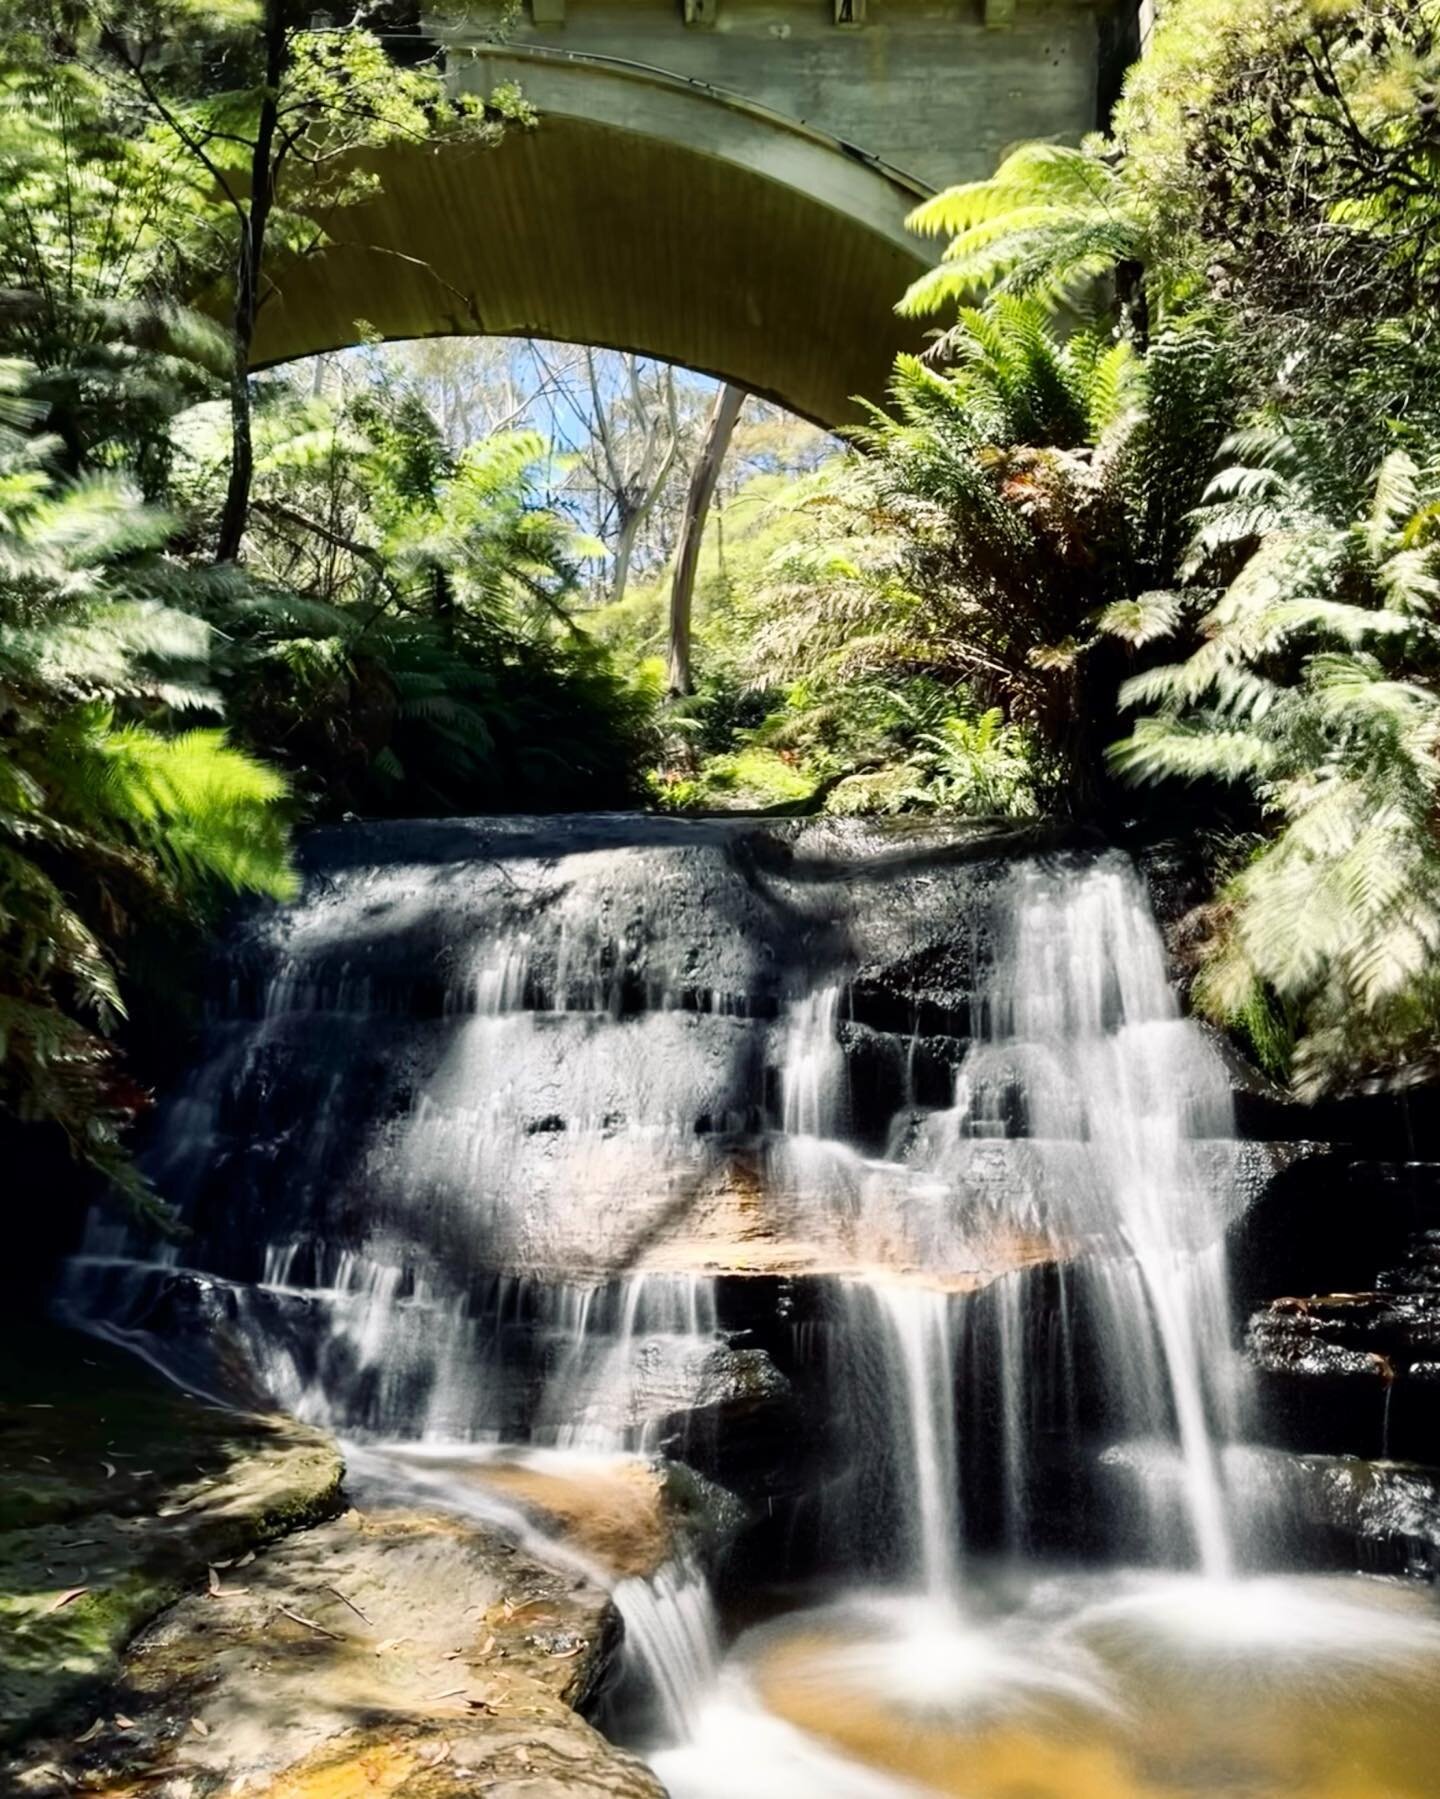 I went chasing waterfalls over the weekend. I&rsquo;m usually one to be careful but I learnt my lesson and slipped on a cascade and slid all the way down to the waterhole. 

So maybe I should stick to the creeks that I&rsquo;m used to. But it&rsquo;s